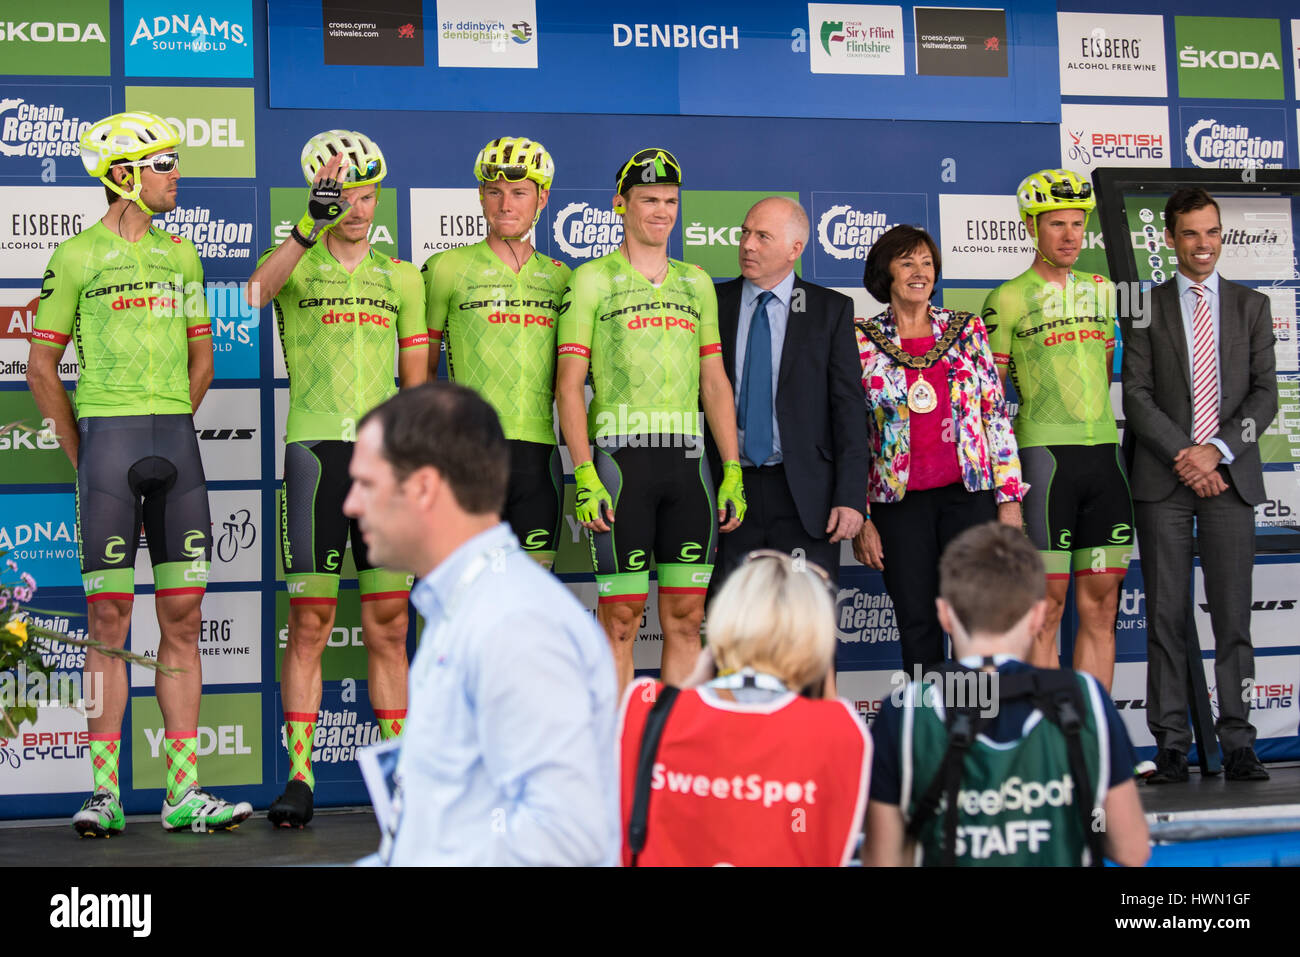 Team Cannondale Drapac at Stage 4 of the Tour of Britain 2016 in Denbigh Stock Photo